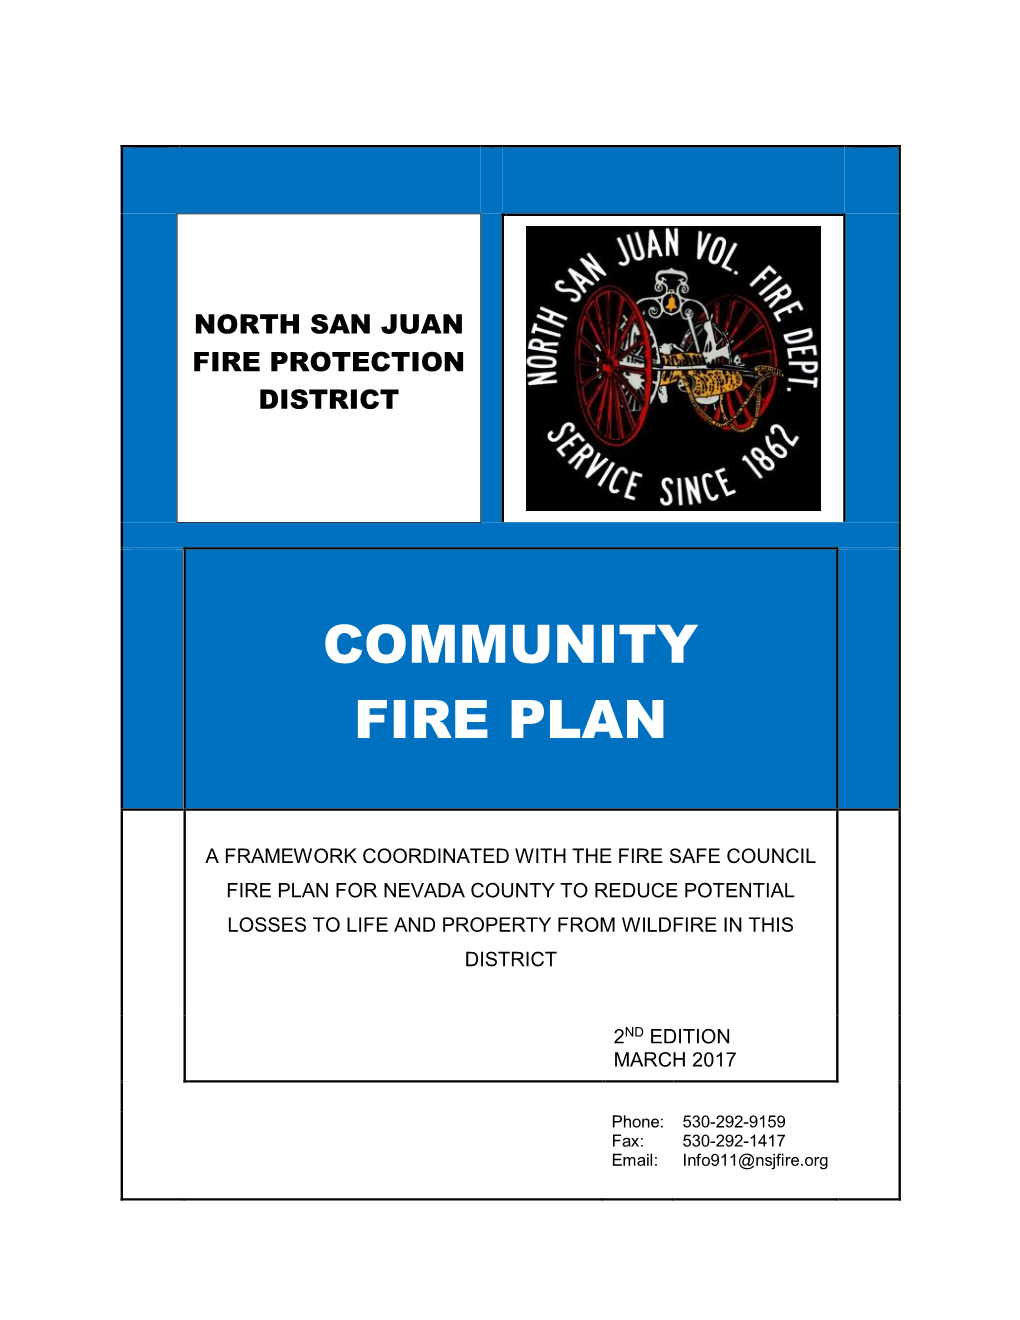 Community Fire Plan, Accepted by the Board and Published in 2005, Is Described in Section 4